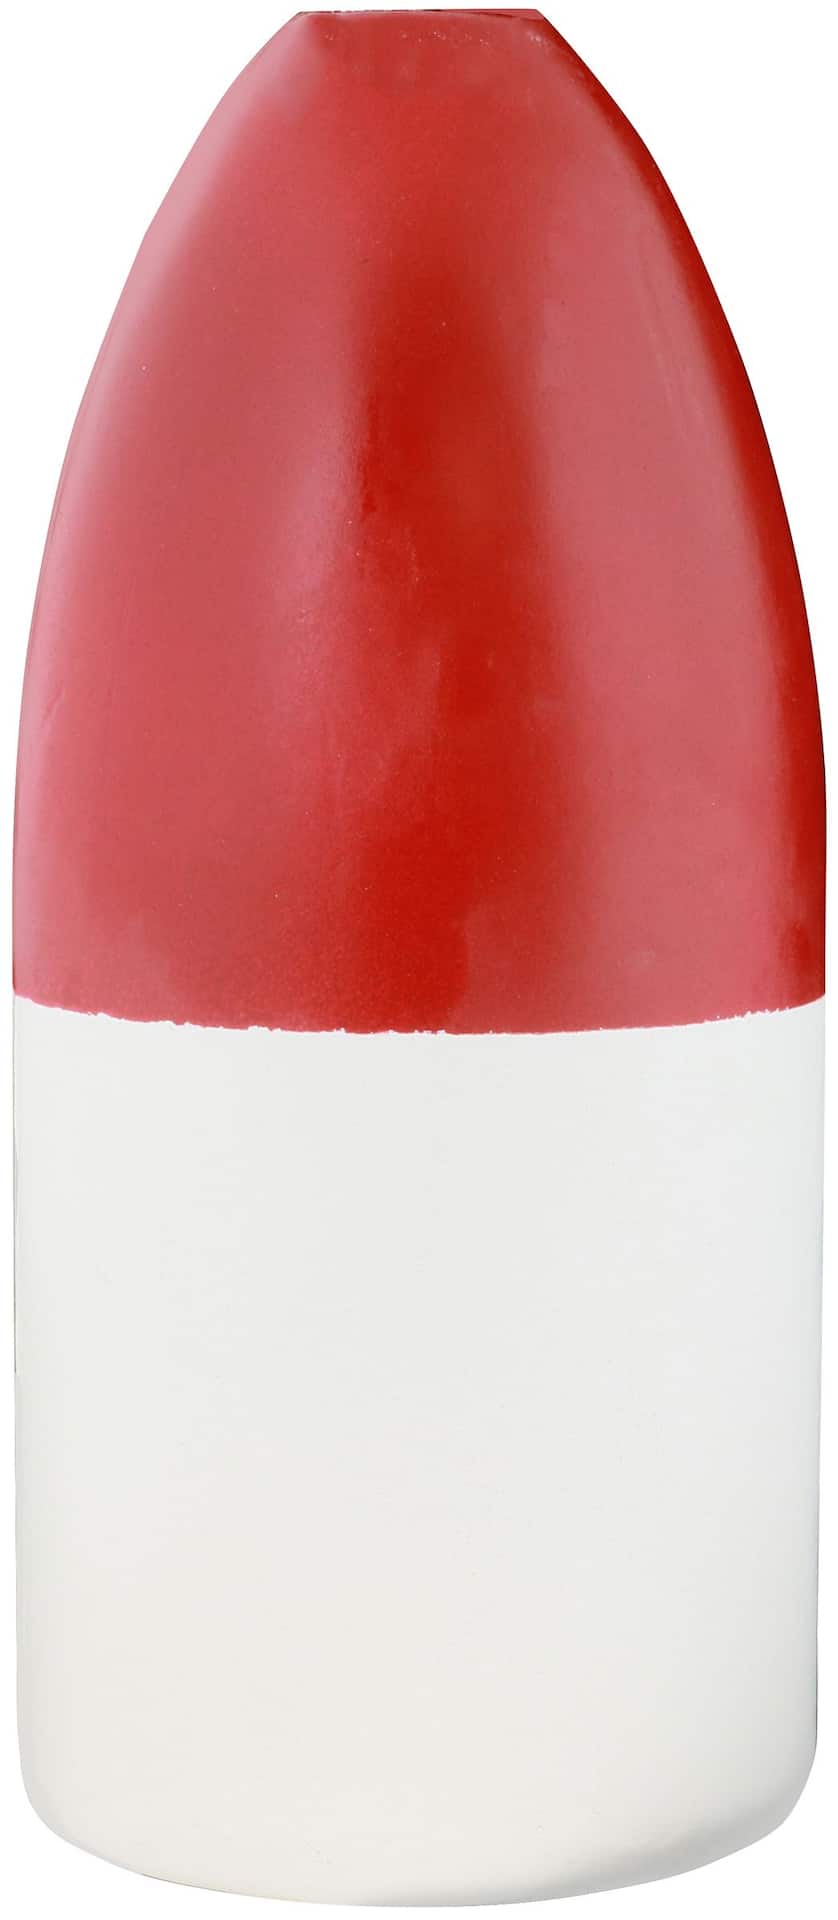 Danielson Crab Pot Float, Red/White